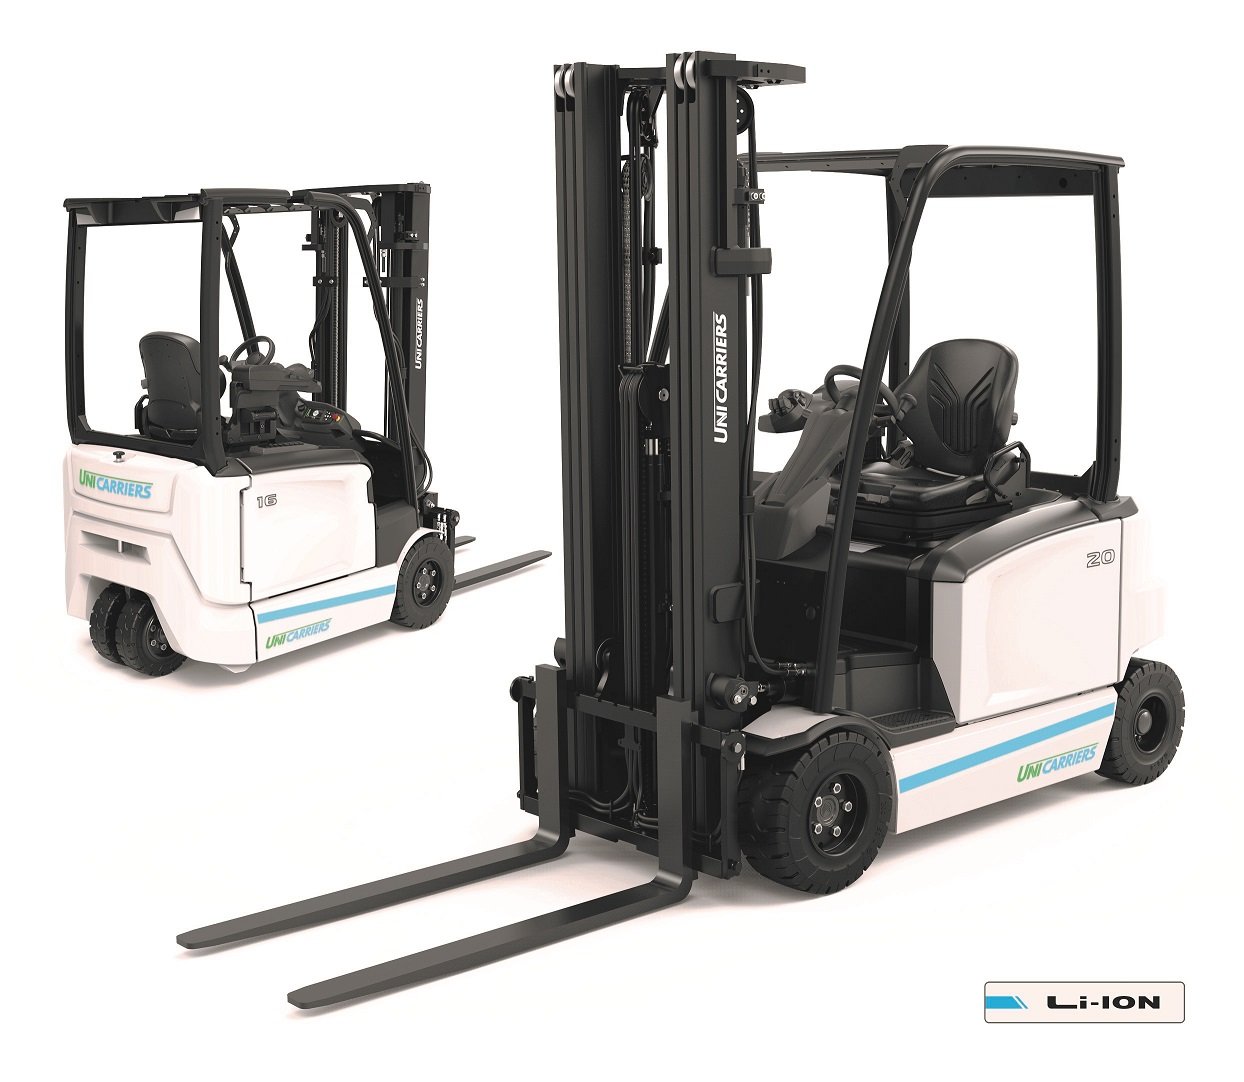 The new MXS3 and MXS4 electric counterbalance